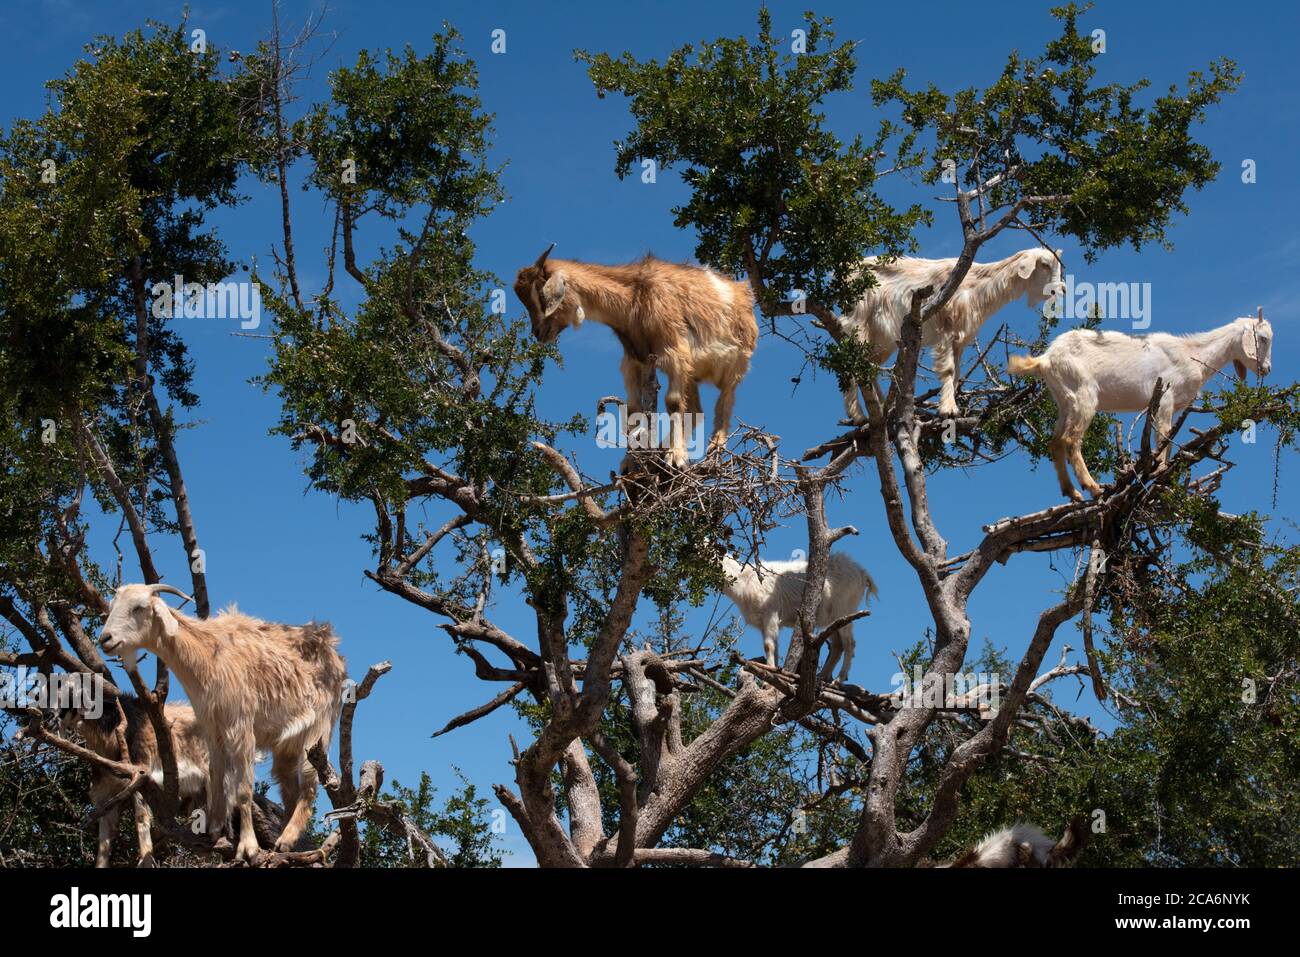 Crown argan tree with white goats on branches against a blue sky background, Morocco Stock Photo